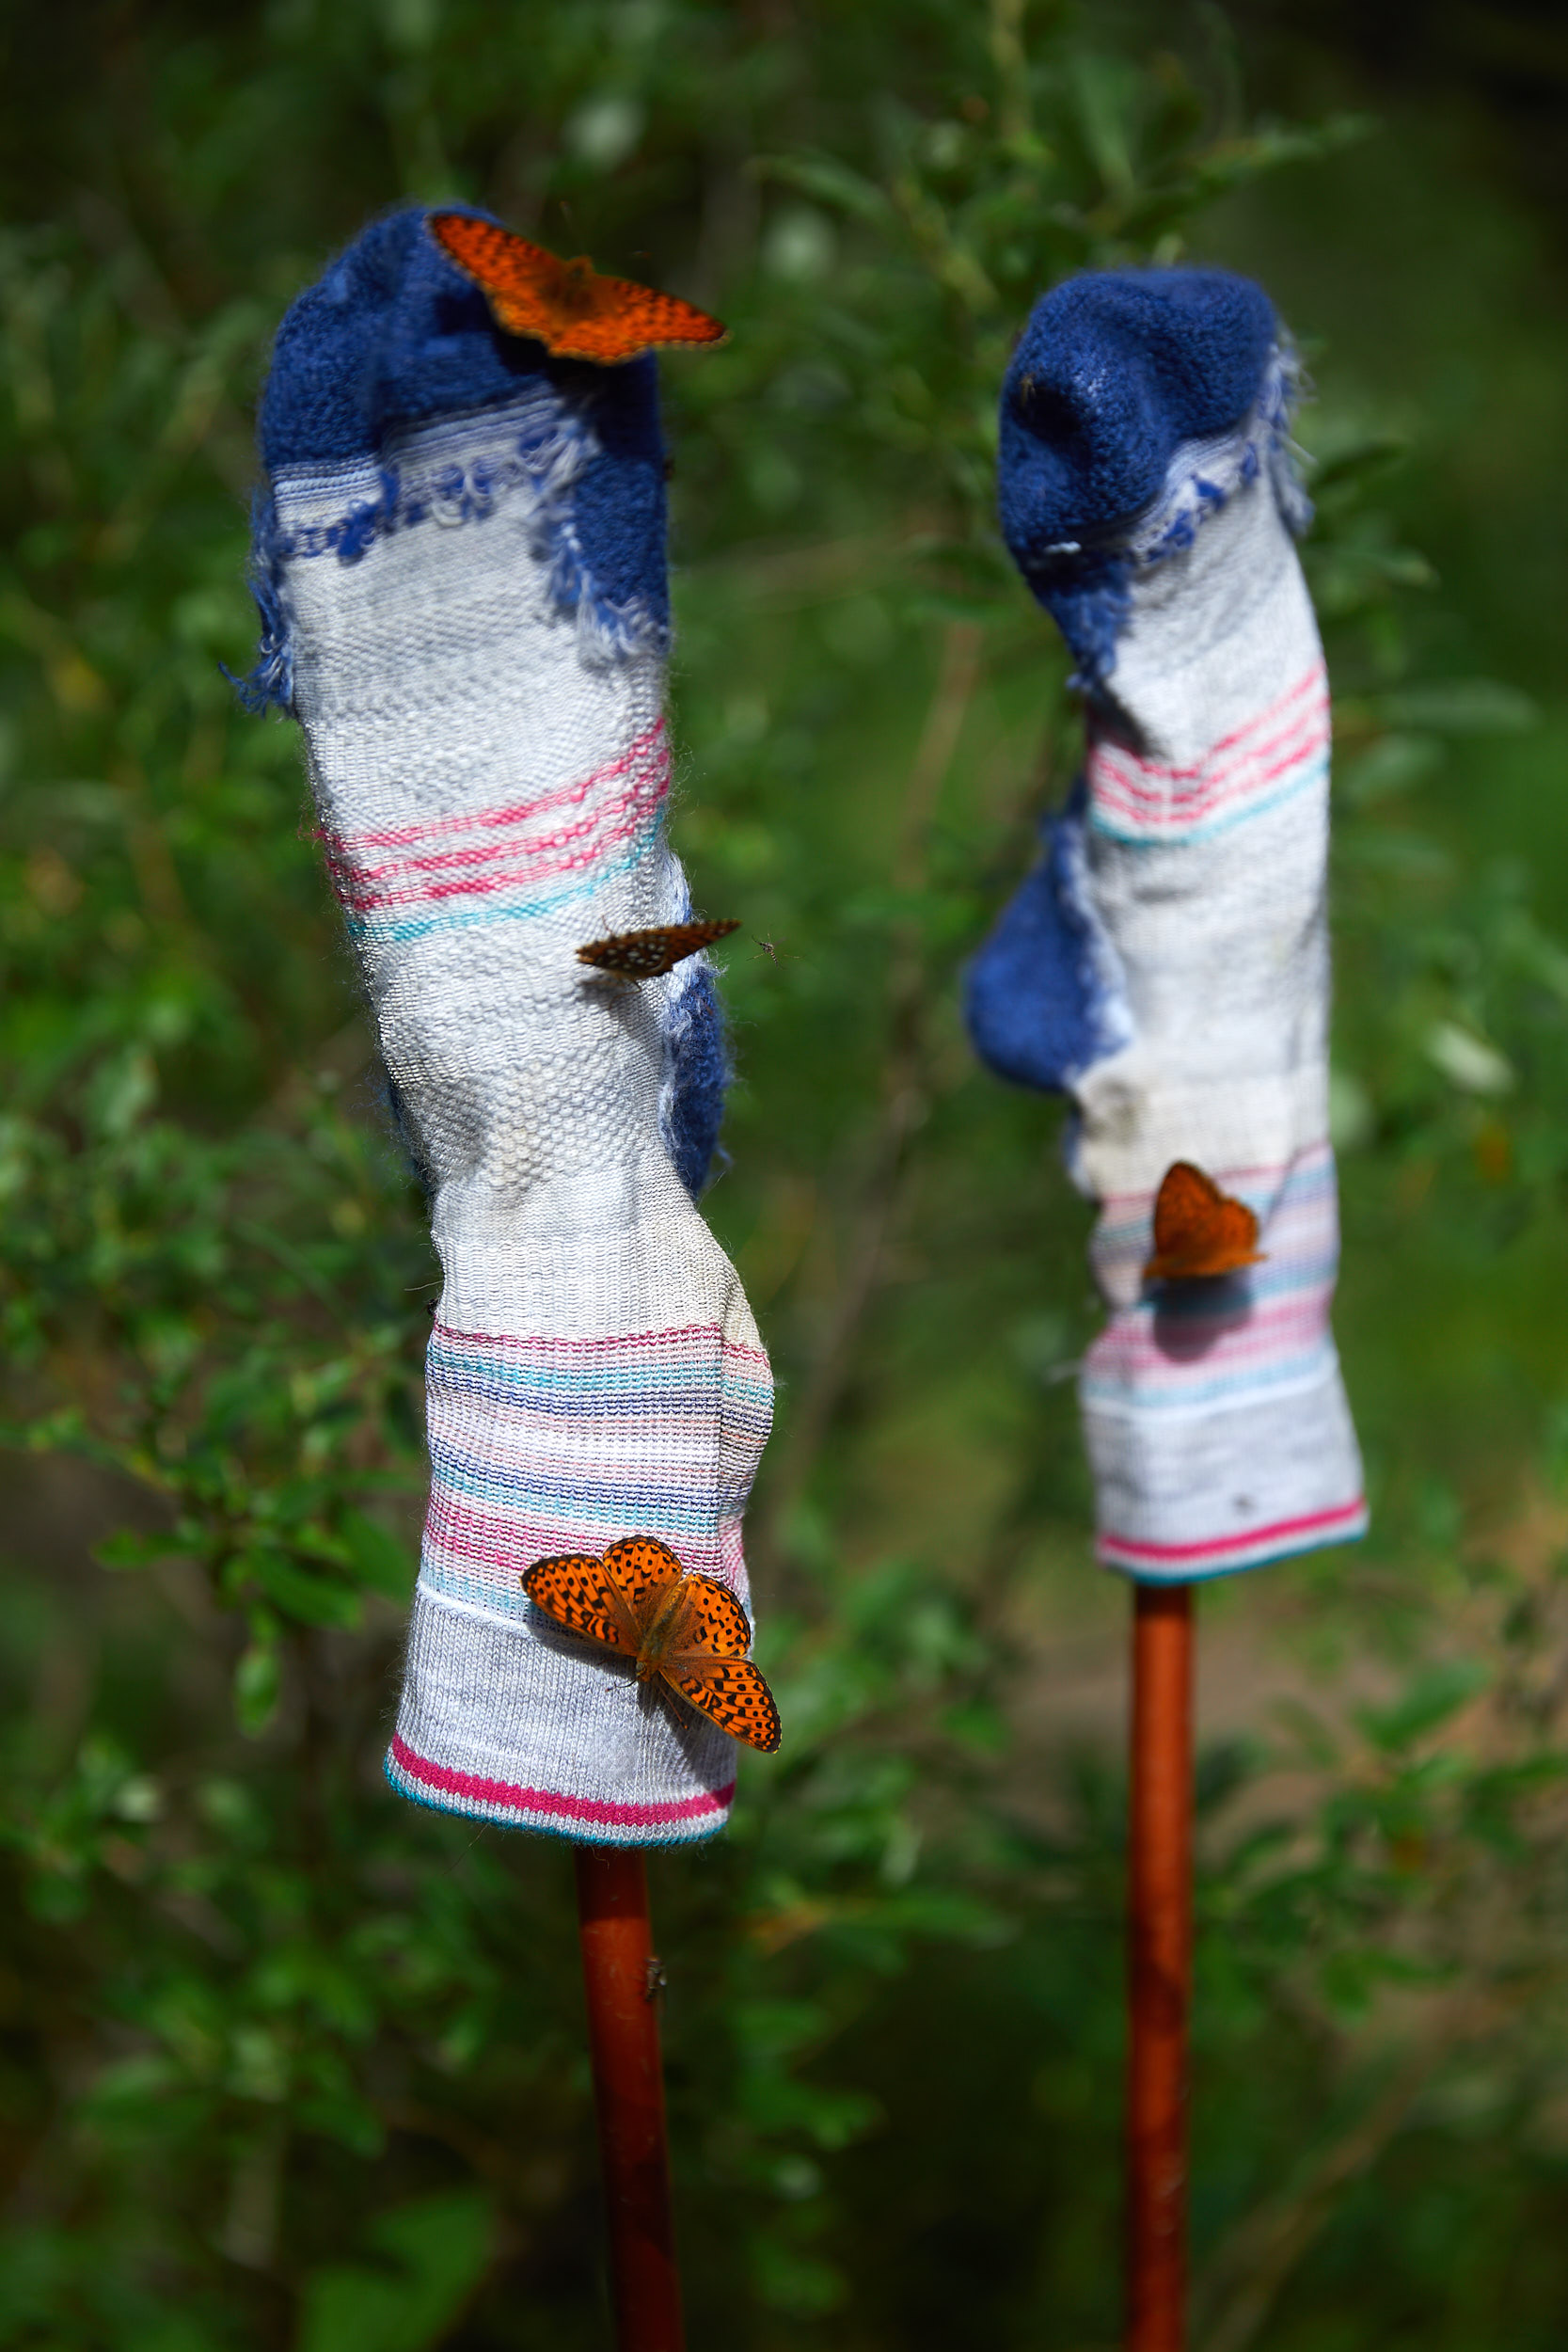  There were tons of butterflies at Porcupine Campground, Paige had setup her socks to dry and they were covered in just a few minutes. 